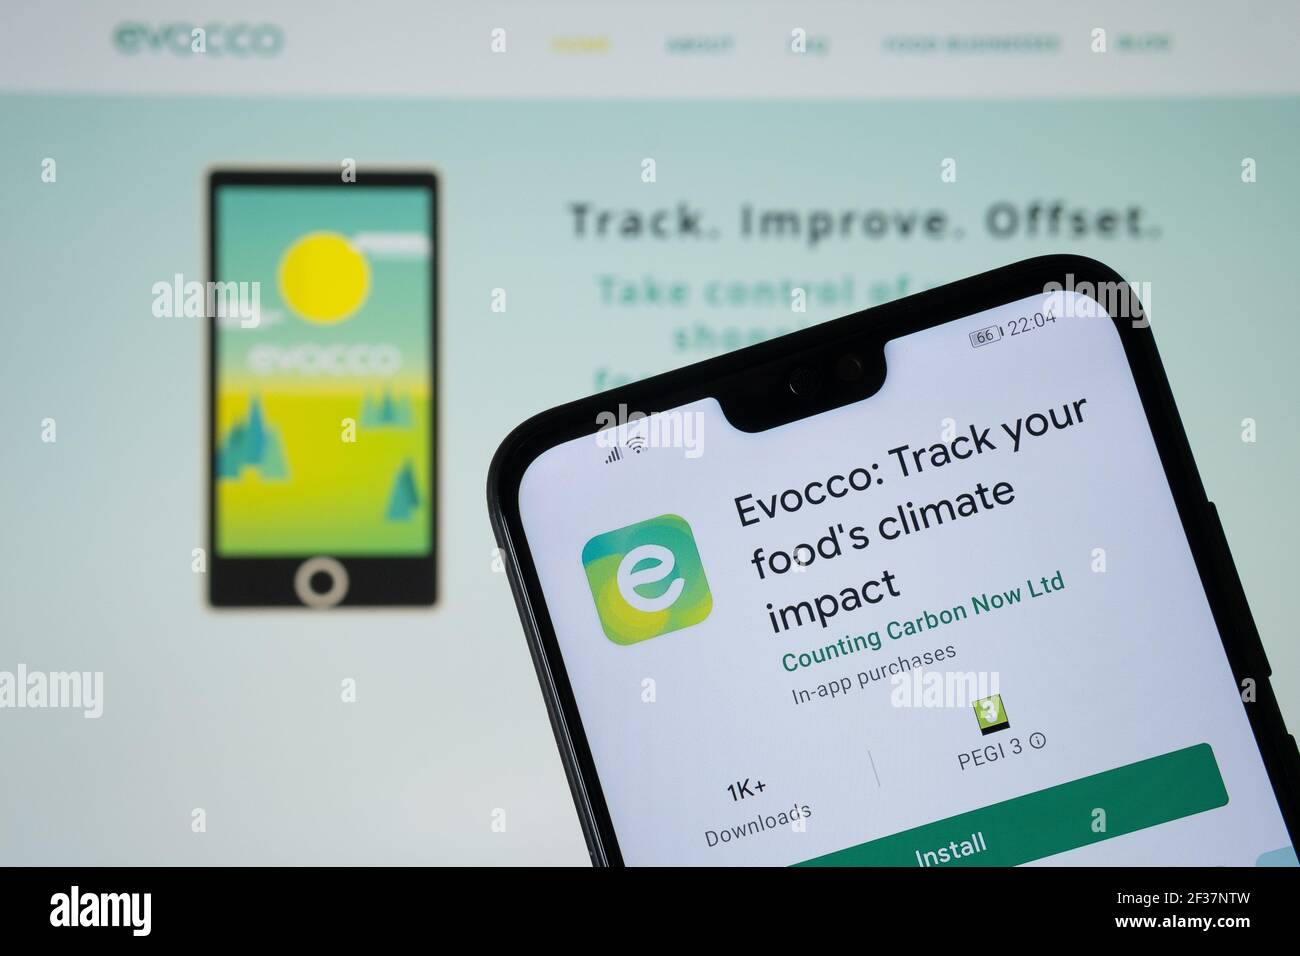 Evocco app for tracking food's climate impact and counting carbon foot print. Stafford, United Kingdom, March 15, 2021. Stock Photo